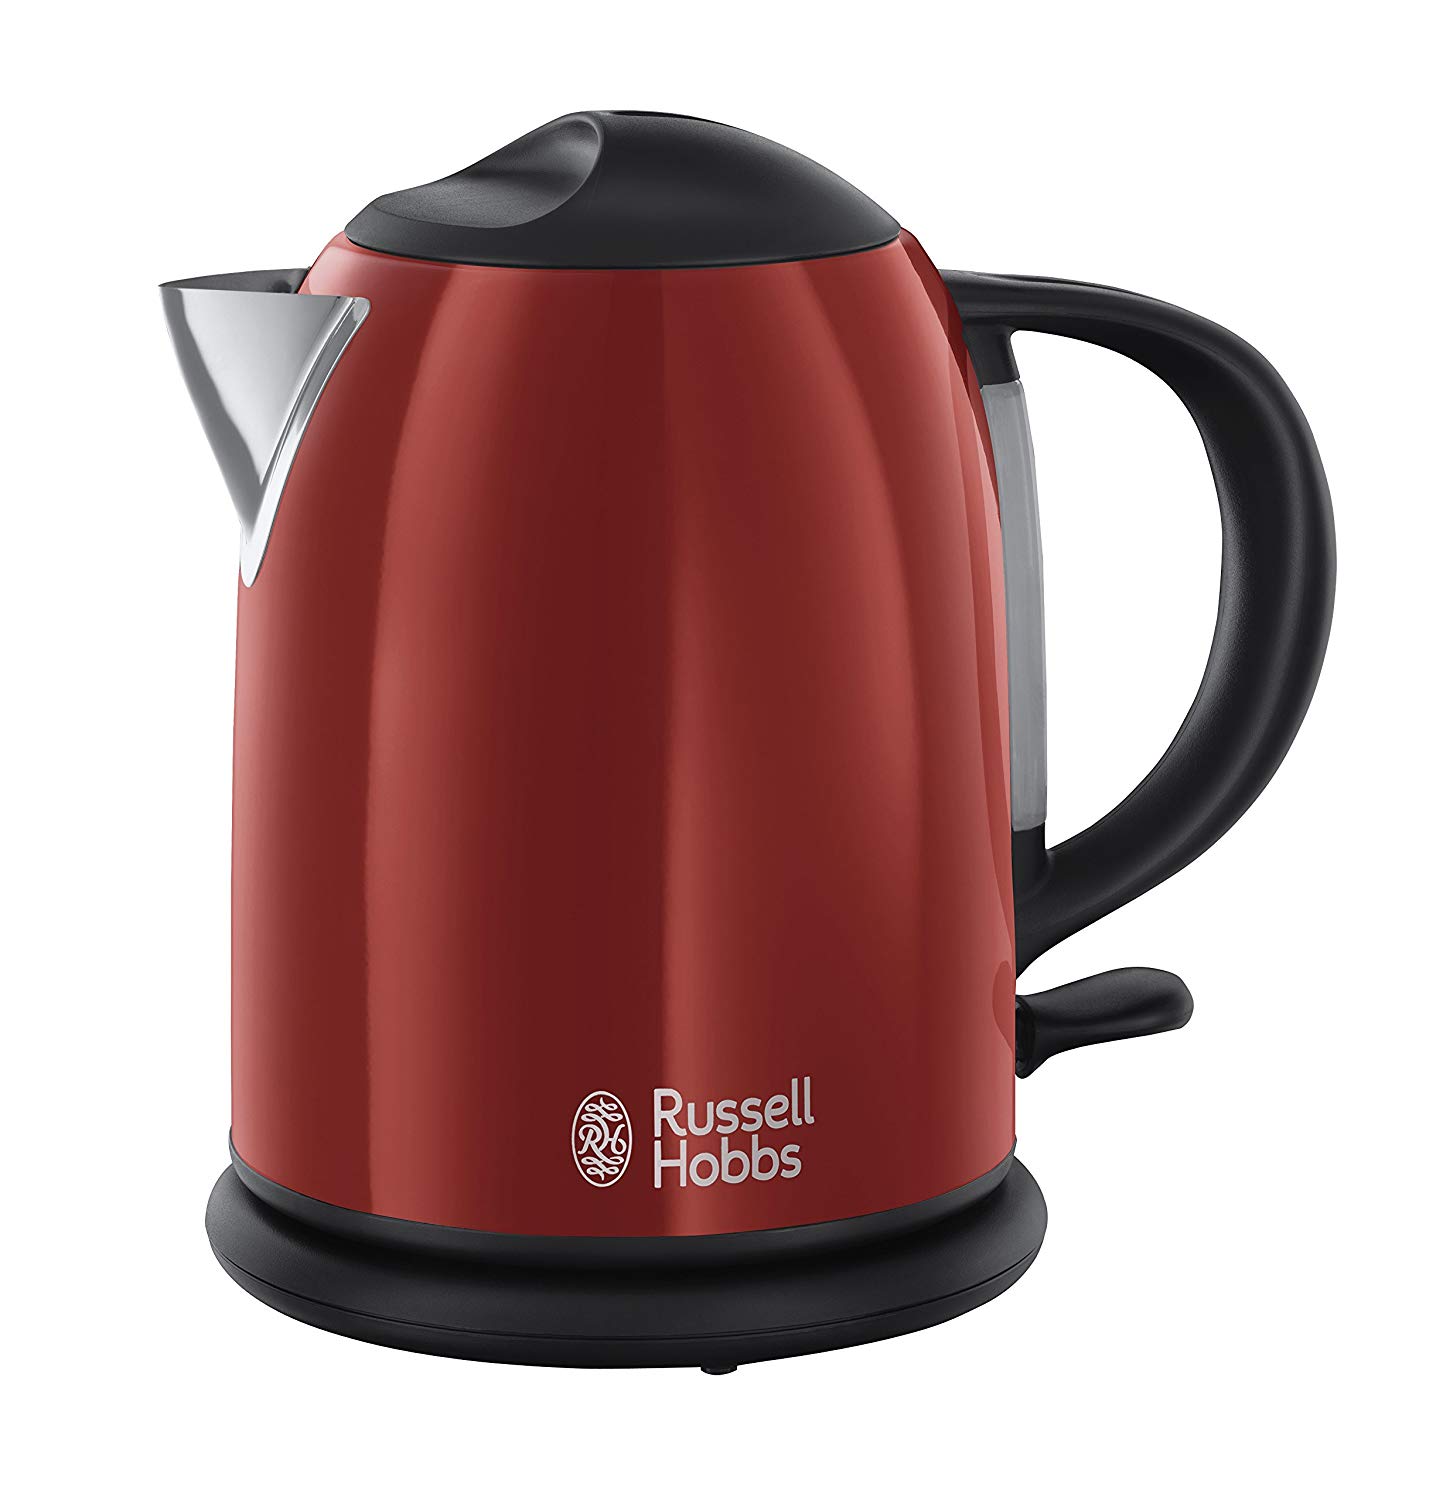 Russell Hobbs Colours Flame Red 20191-70